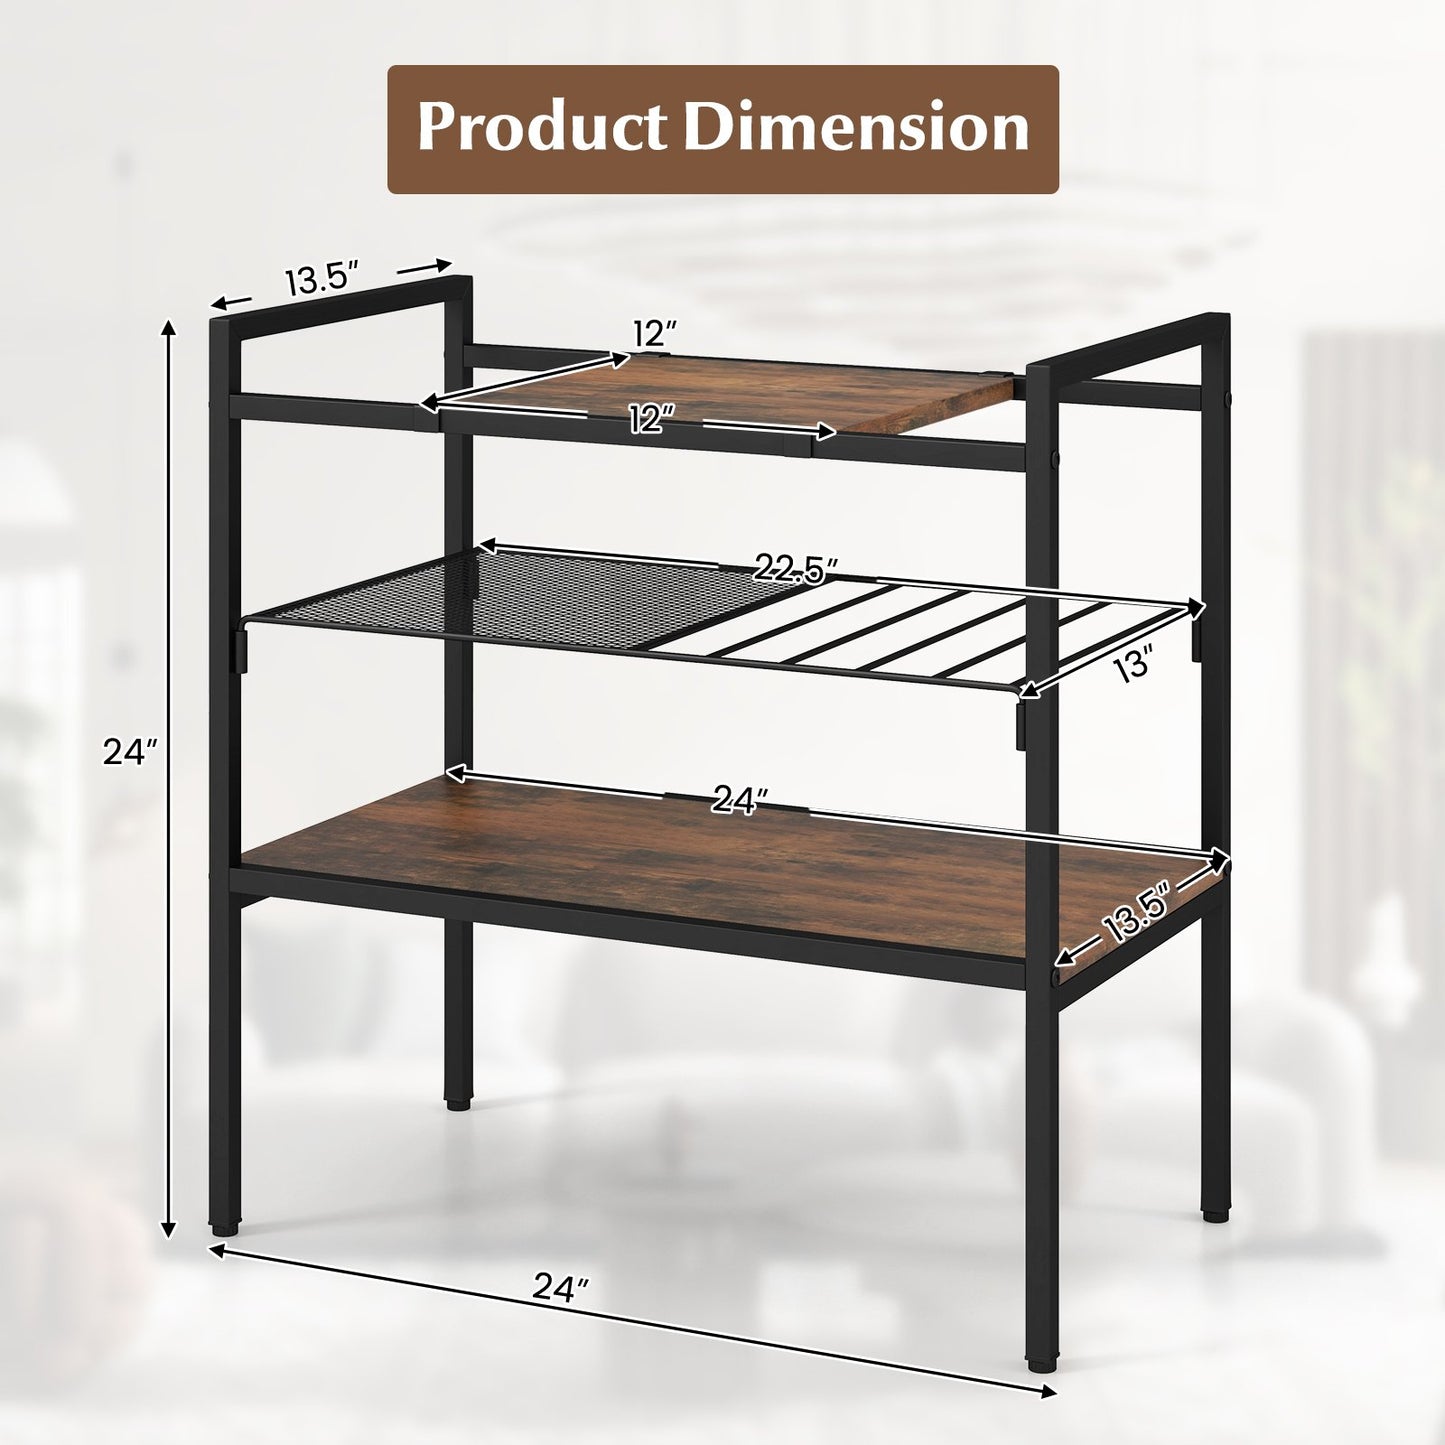 Industrial Entryway Table with Removable Panel and Mesh Shelf, Rustic Brown